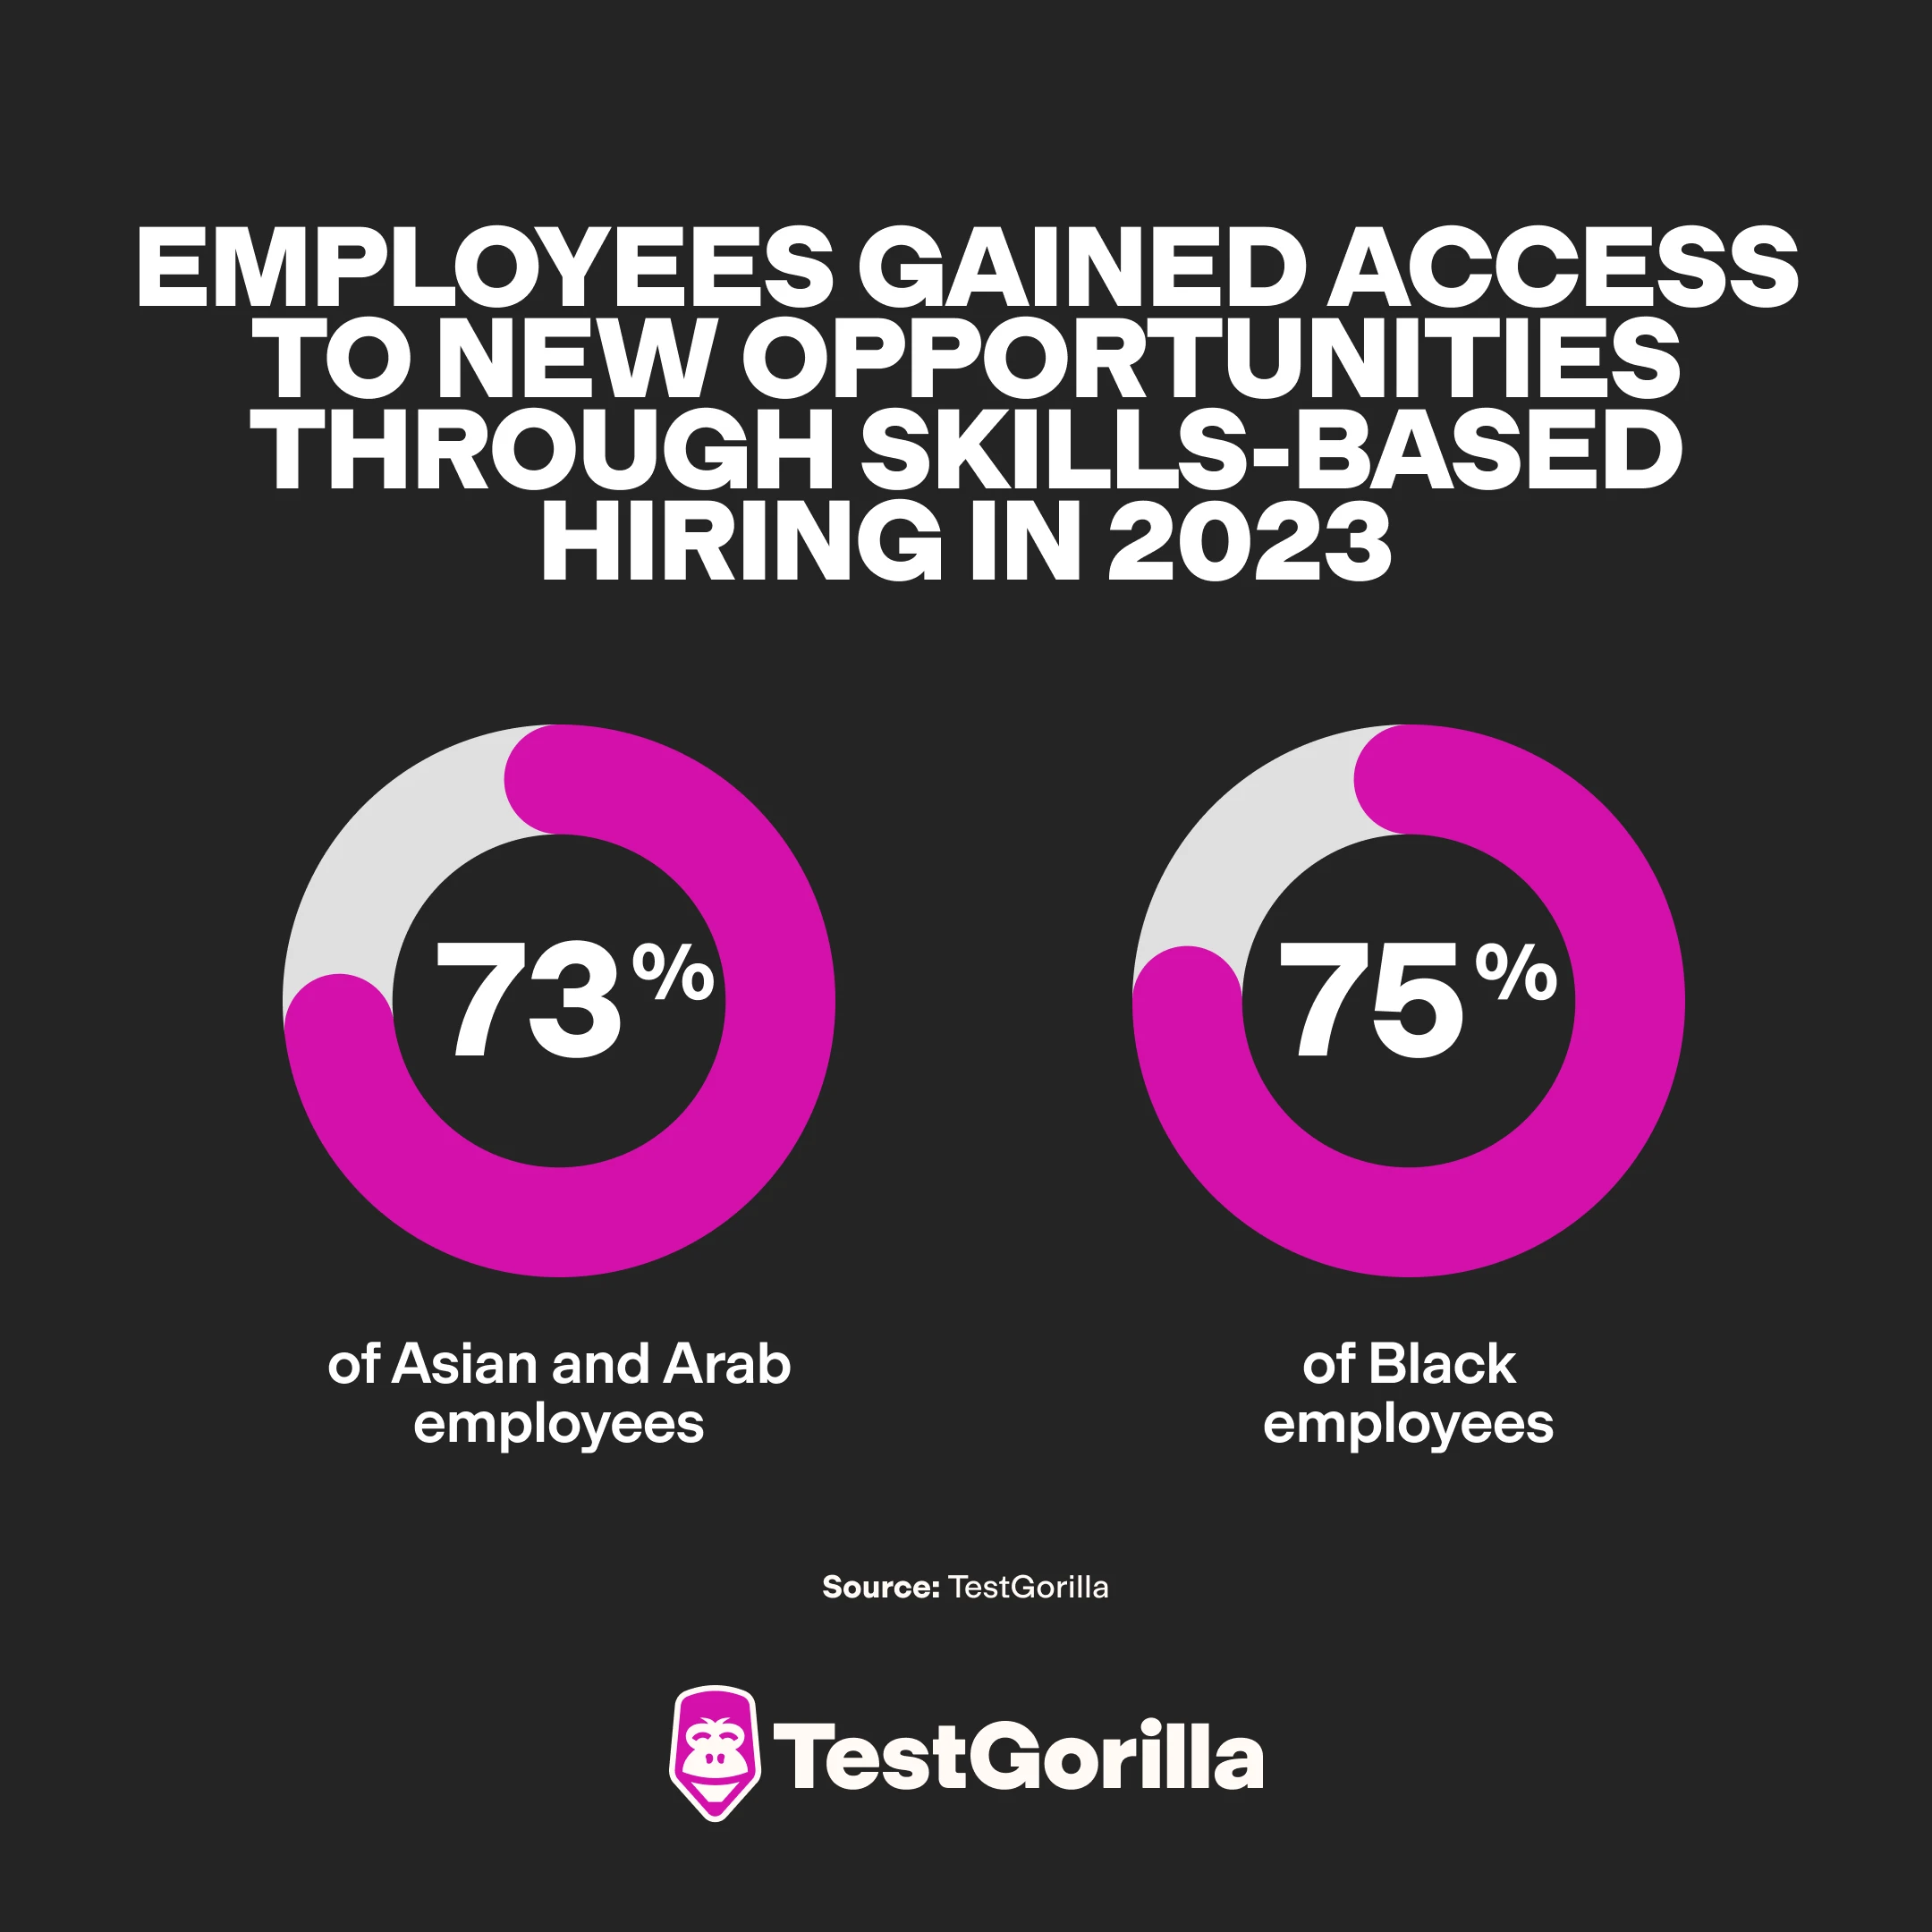 Employees gained access to new opportunities through skills based hiring in 2023